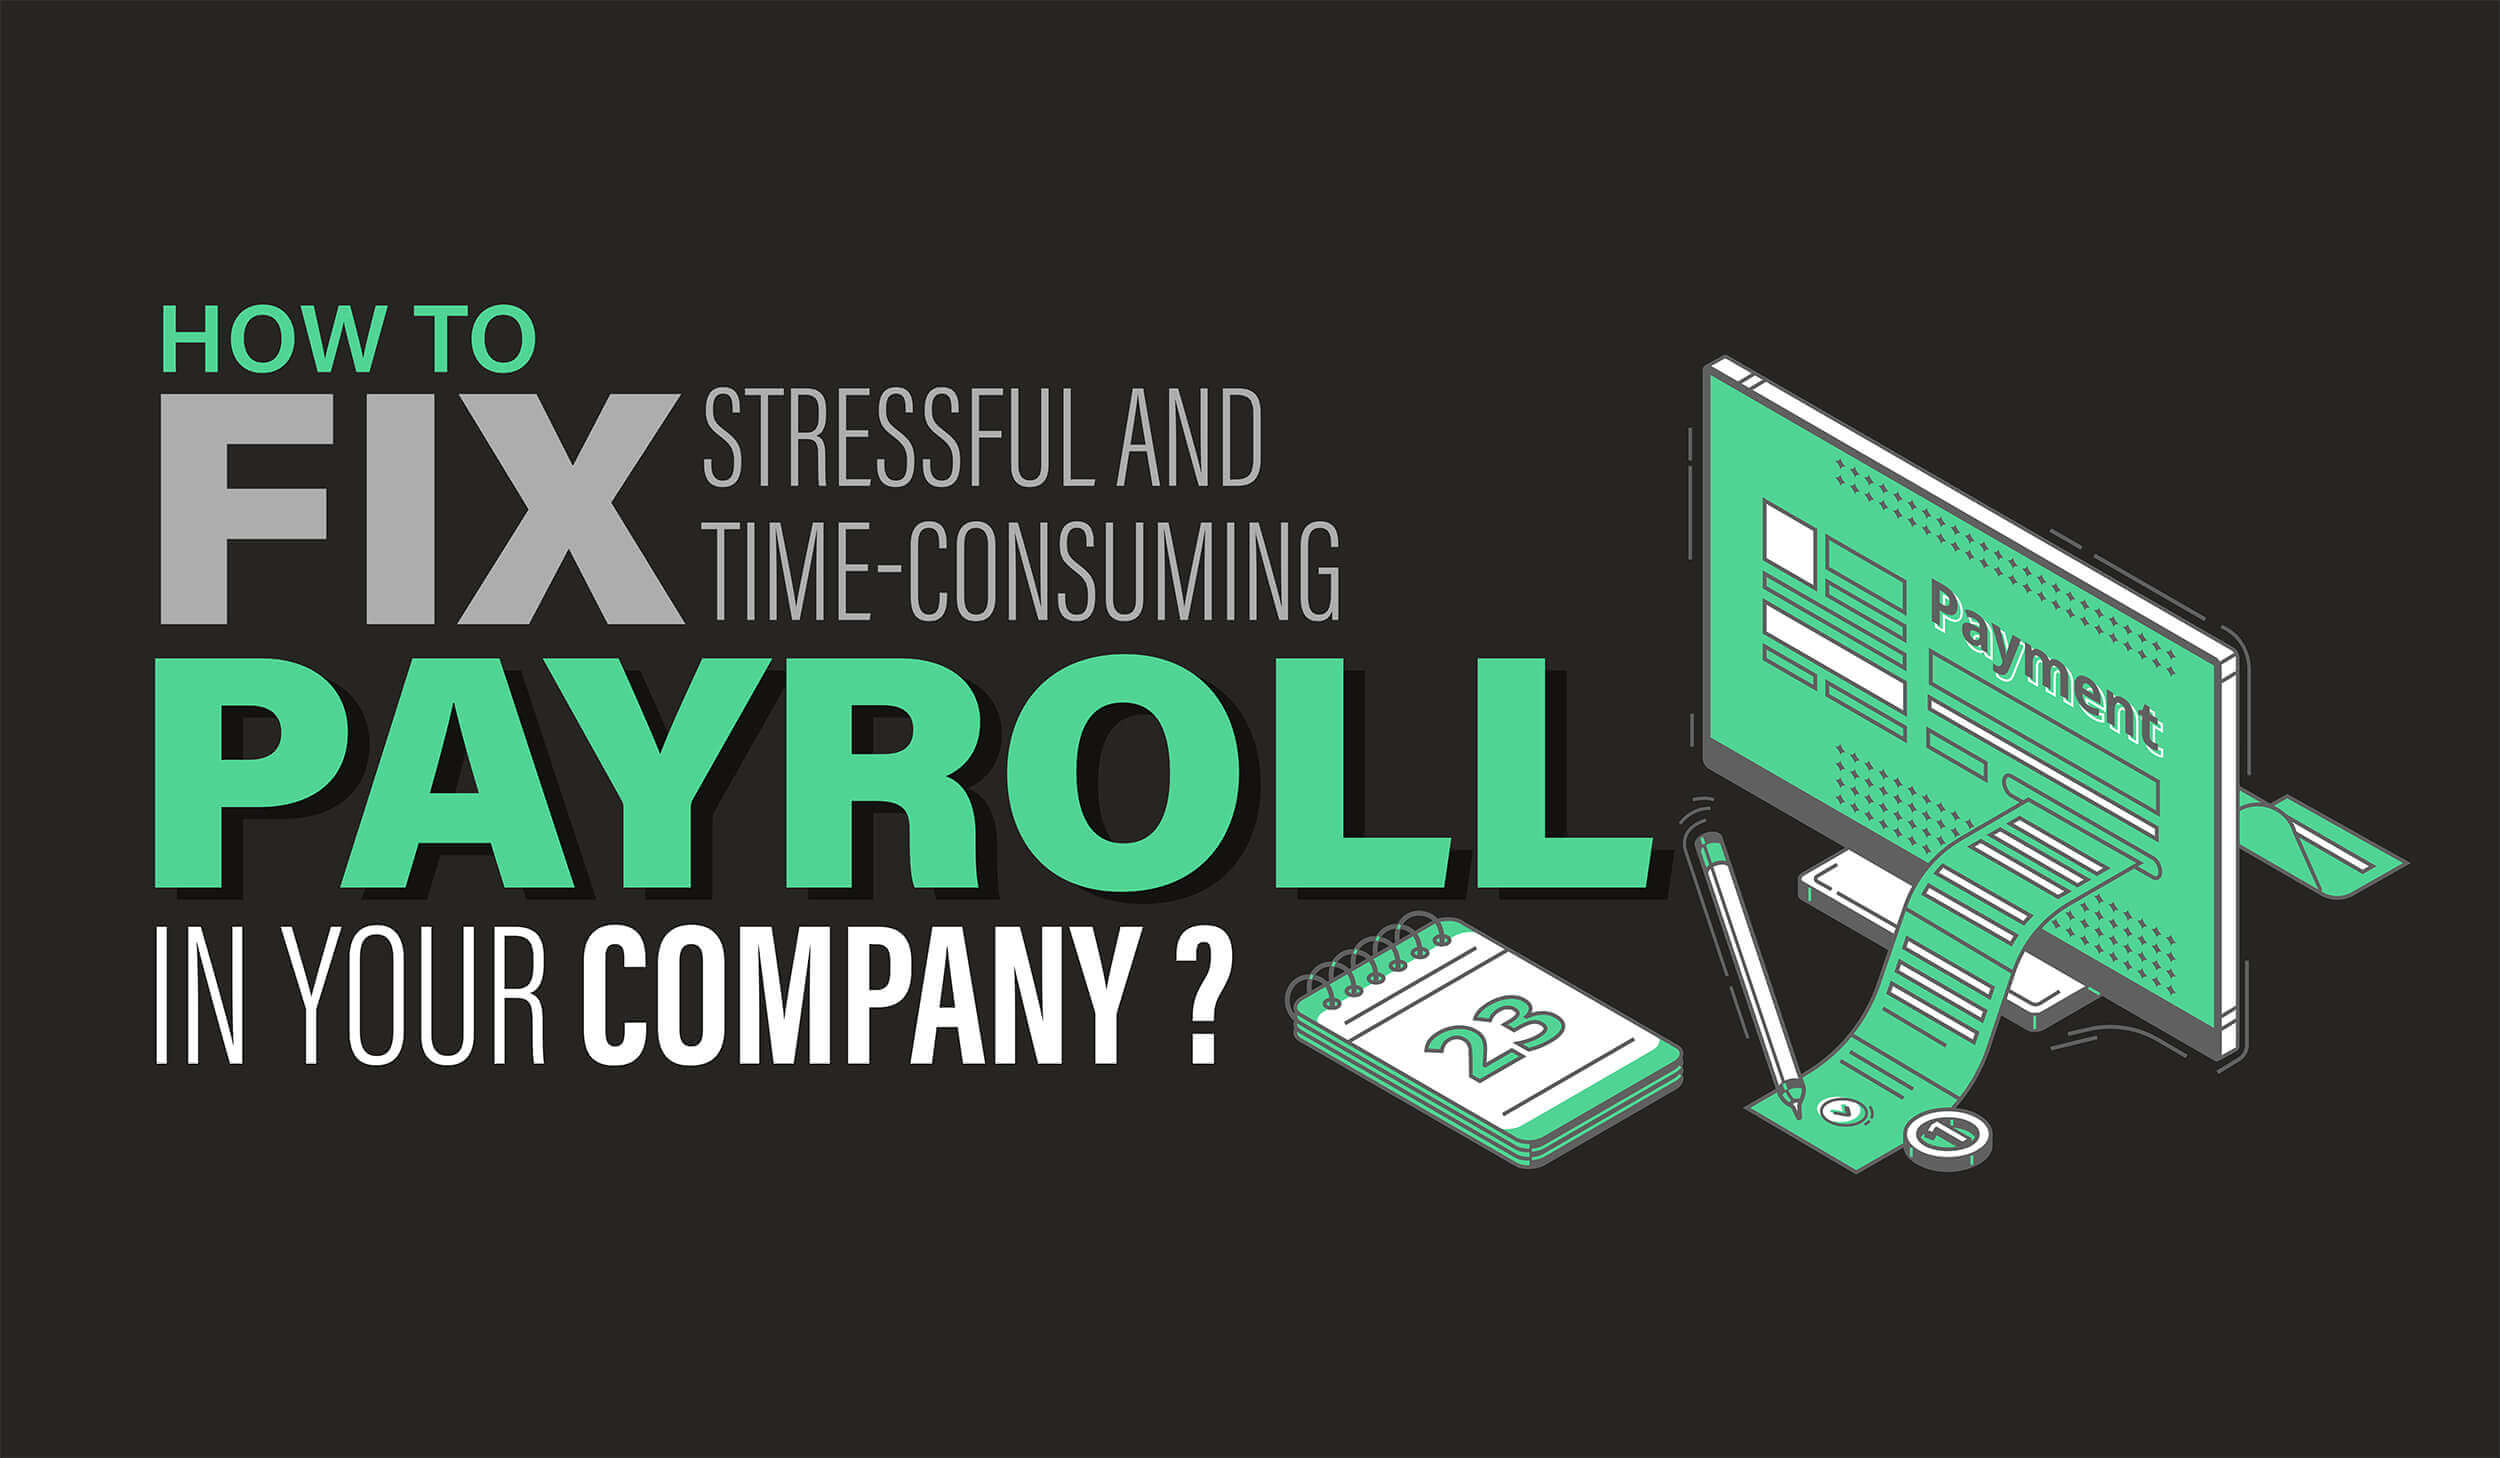 7 How to fix stressful and time consuming payroll in your company